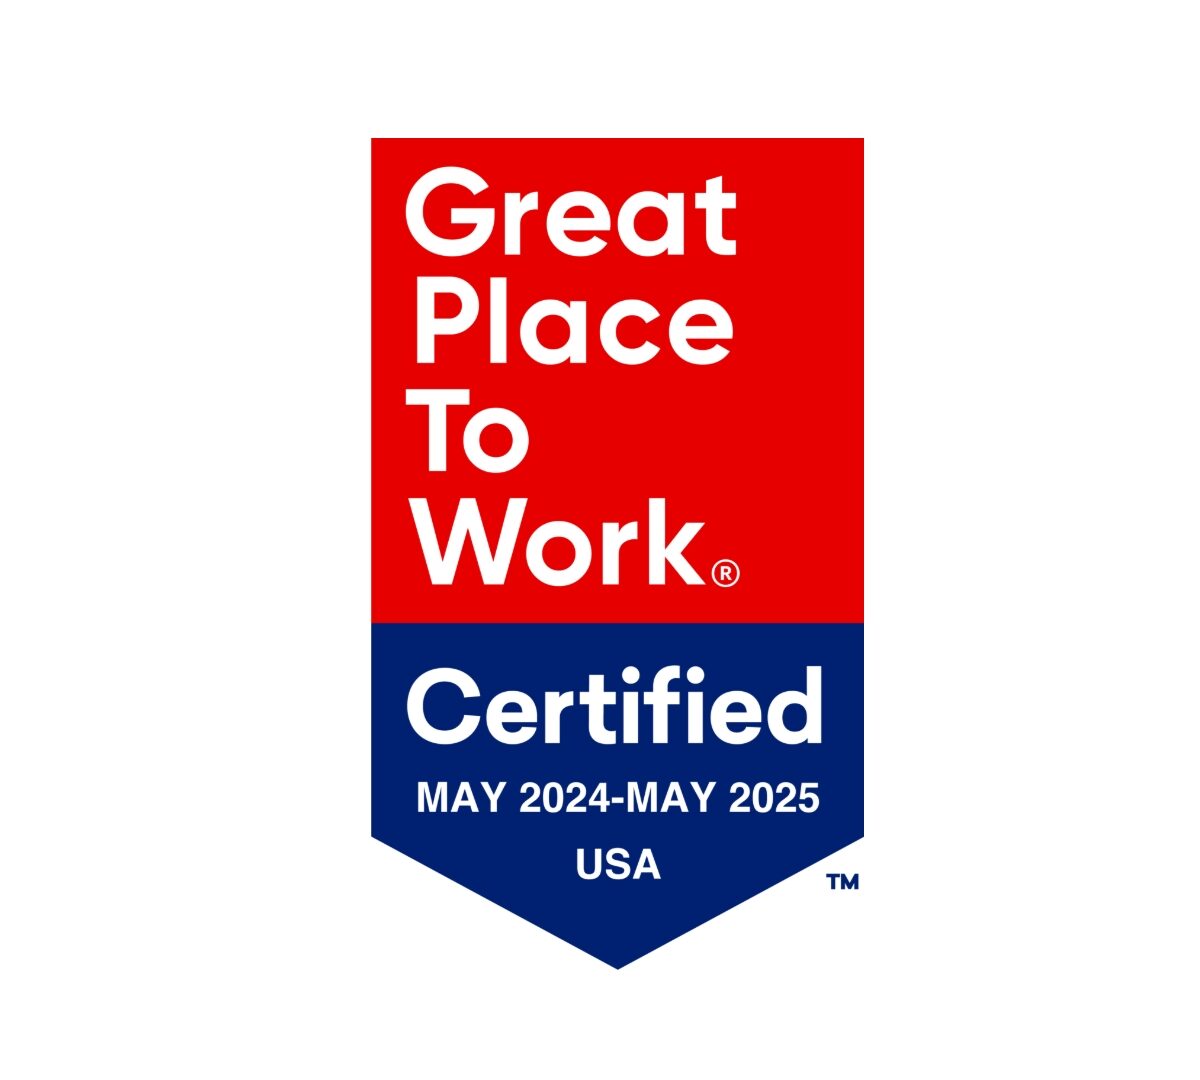 Transforming Age Network Awarded the Great Place To Work® Certification